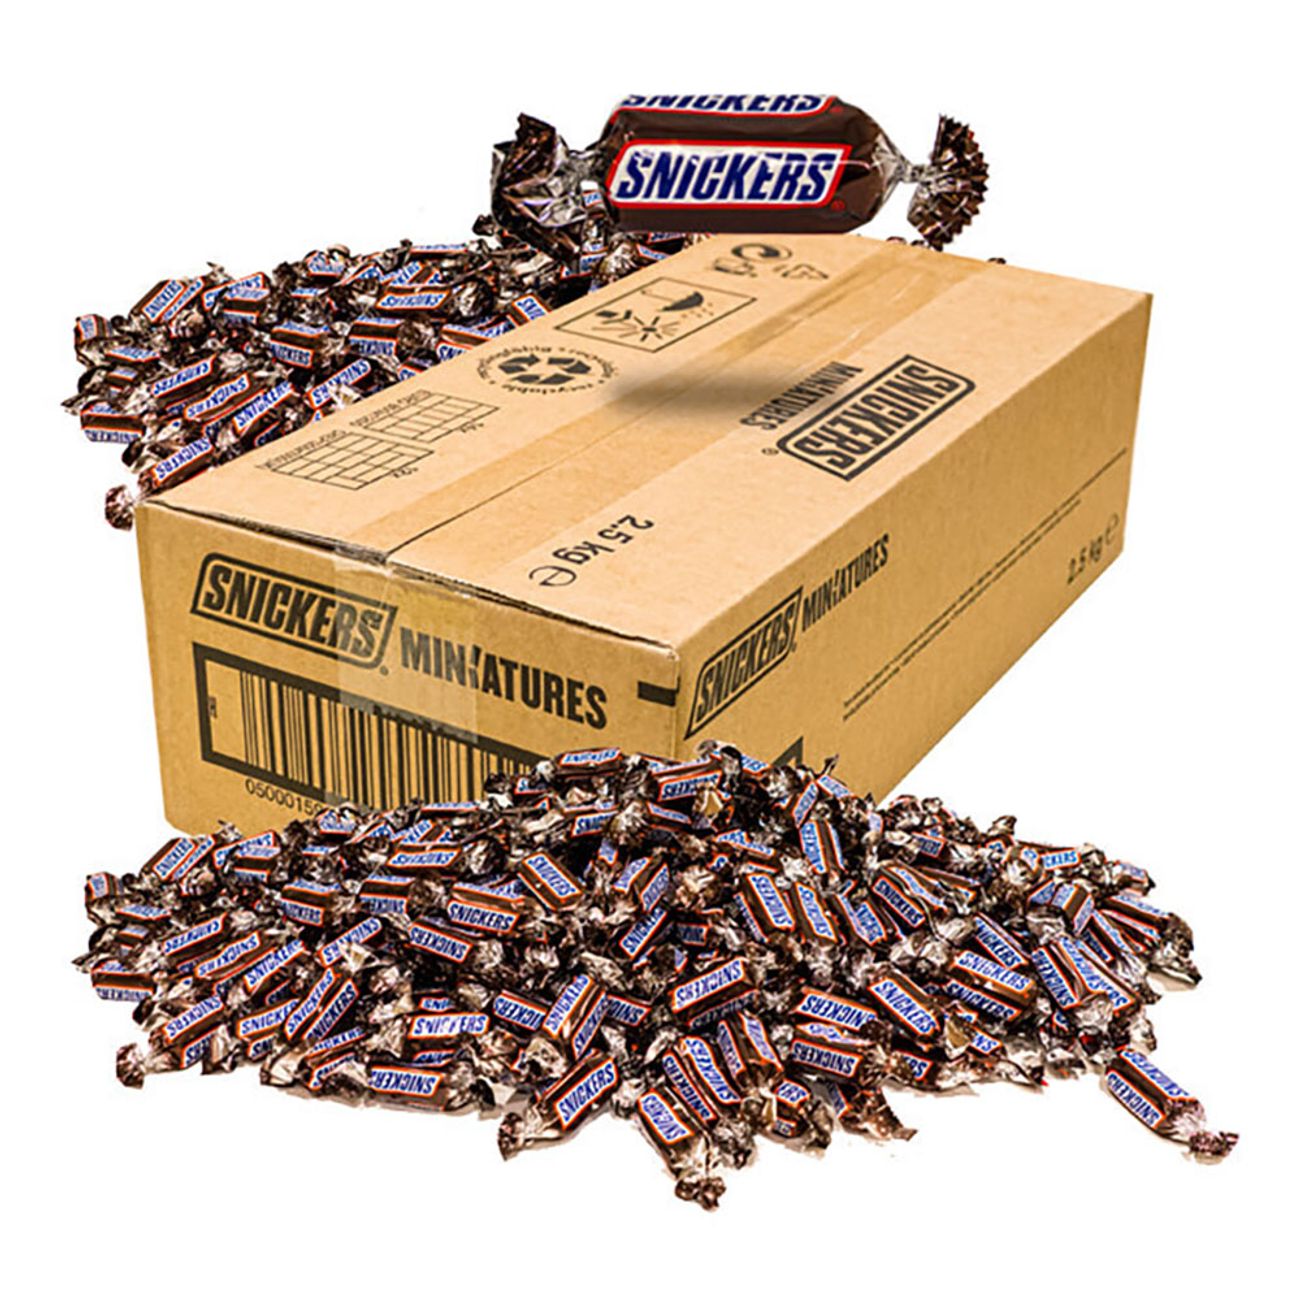 snickers-storpack-83455-1